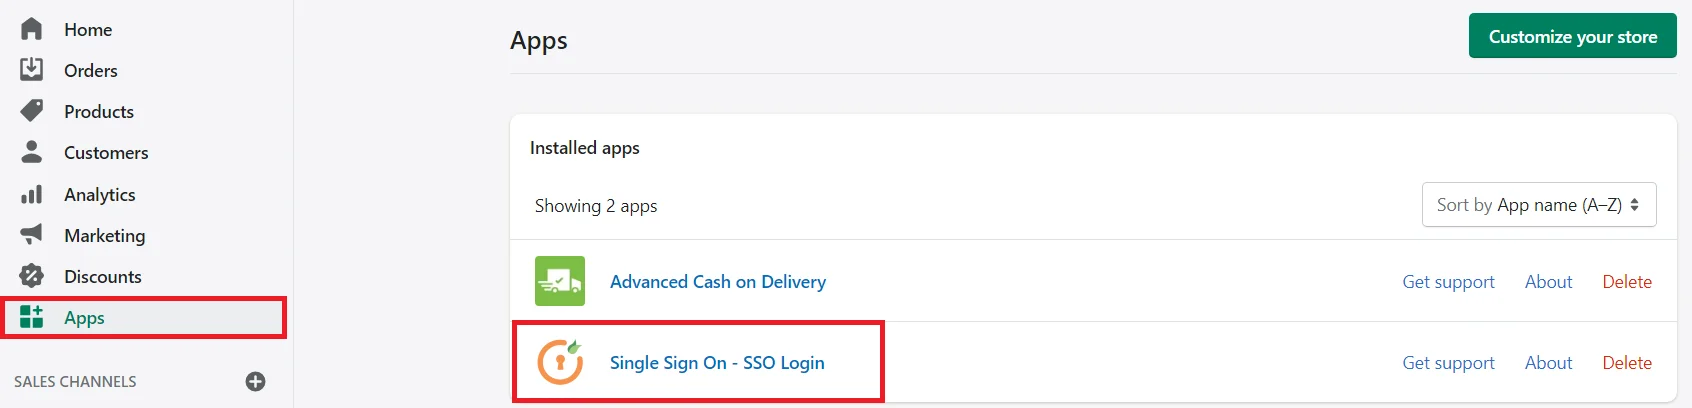 Shopify Single Sign-On (SSO) in wordpress oauth provider- apps tab